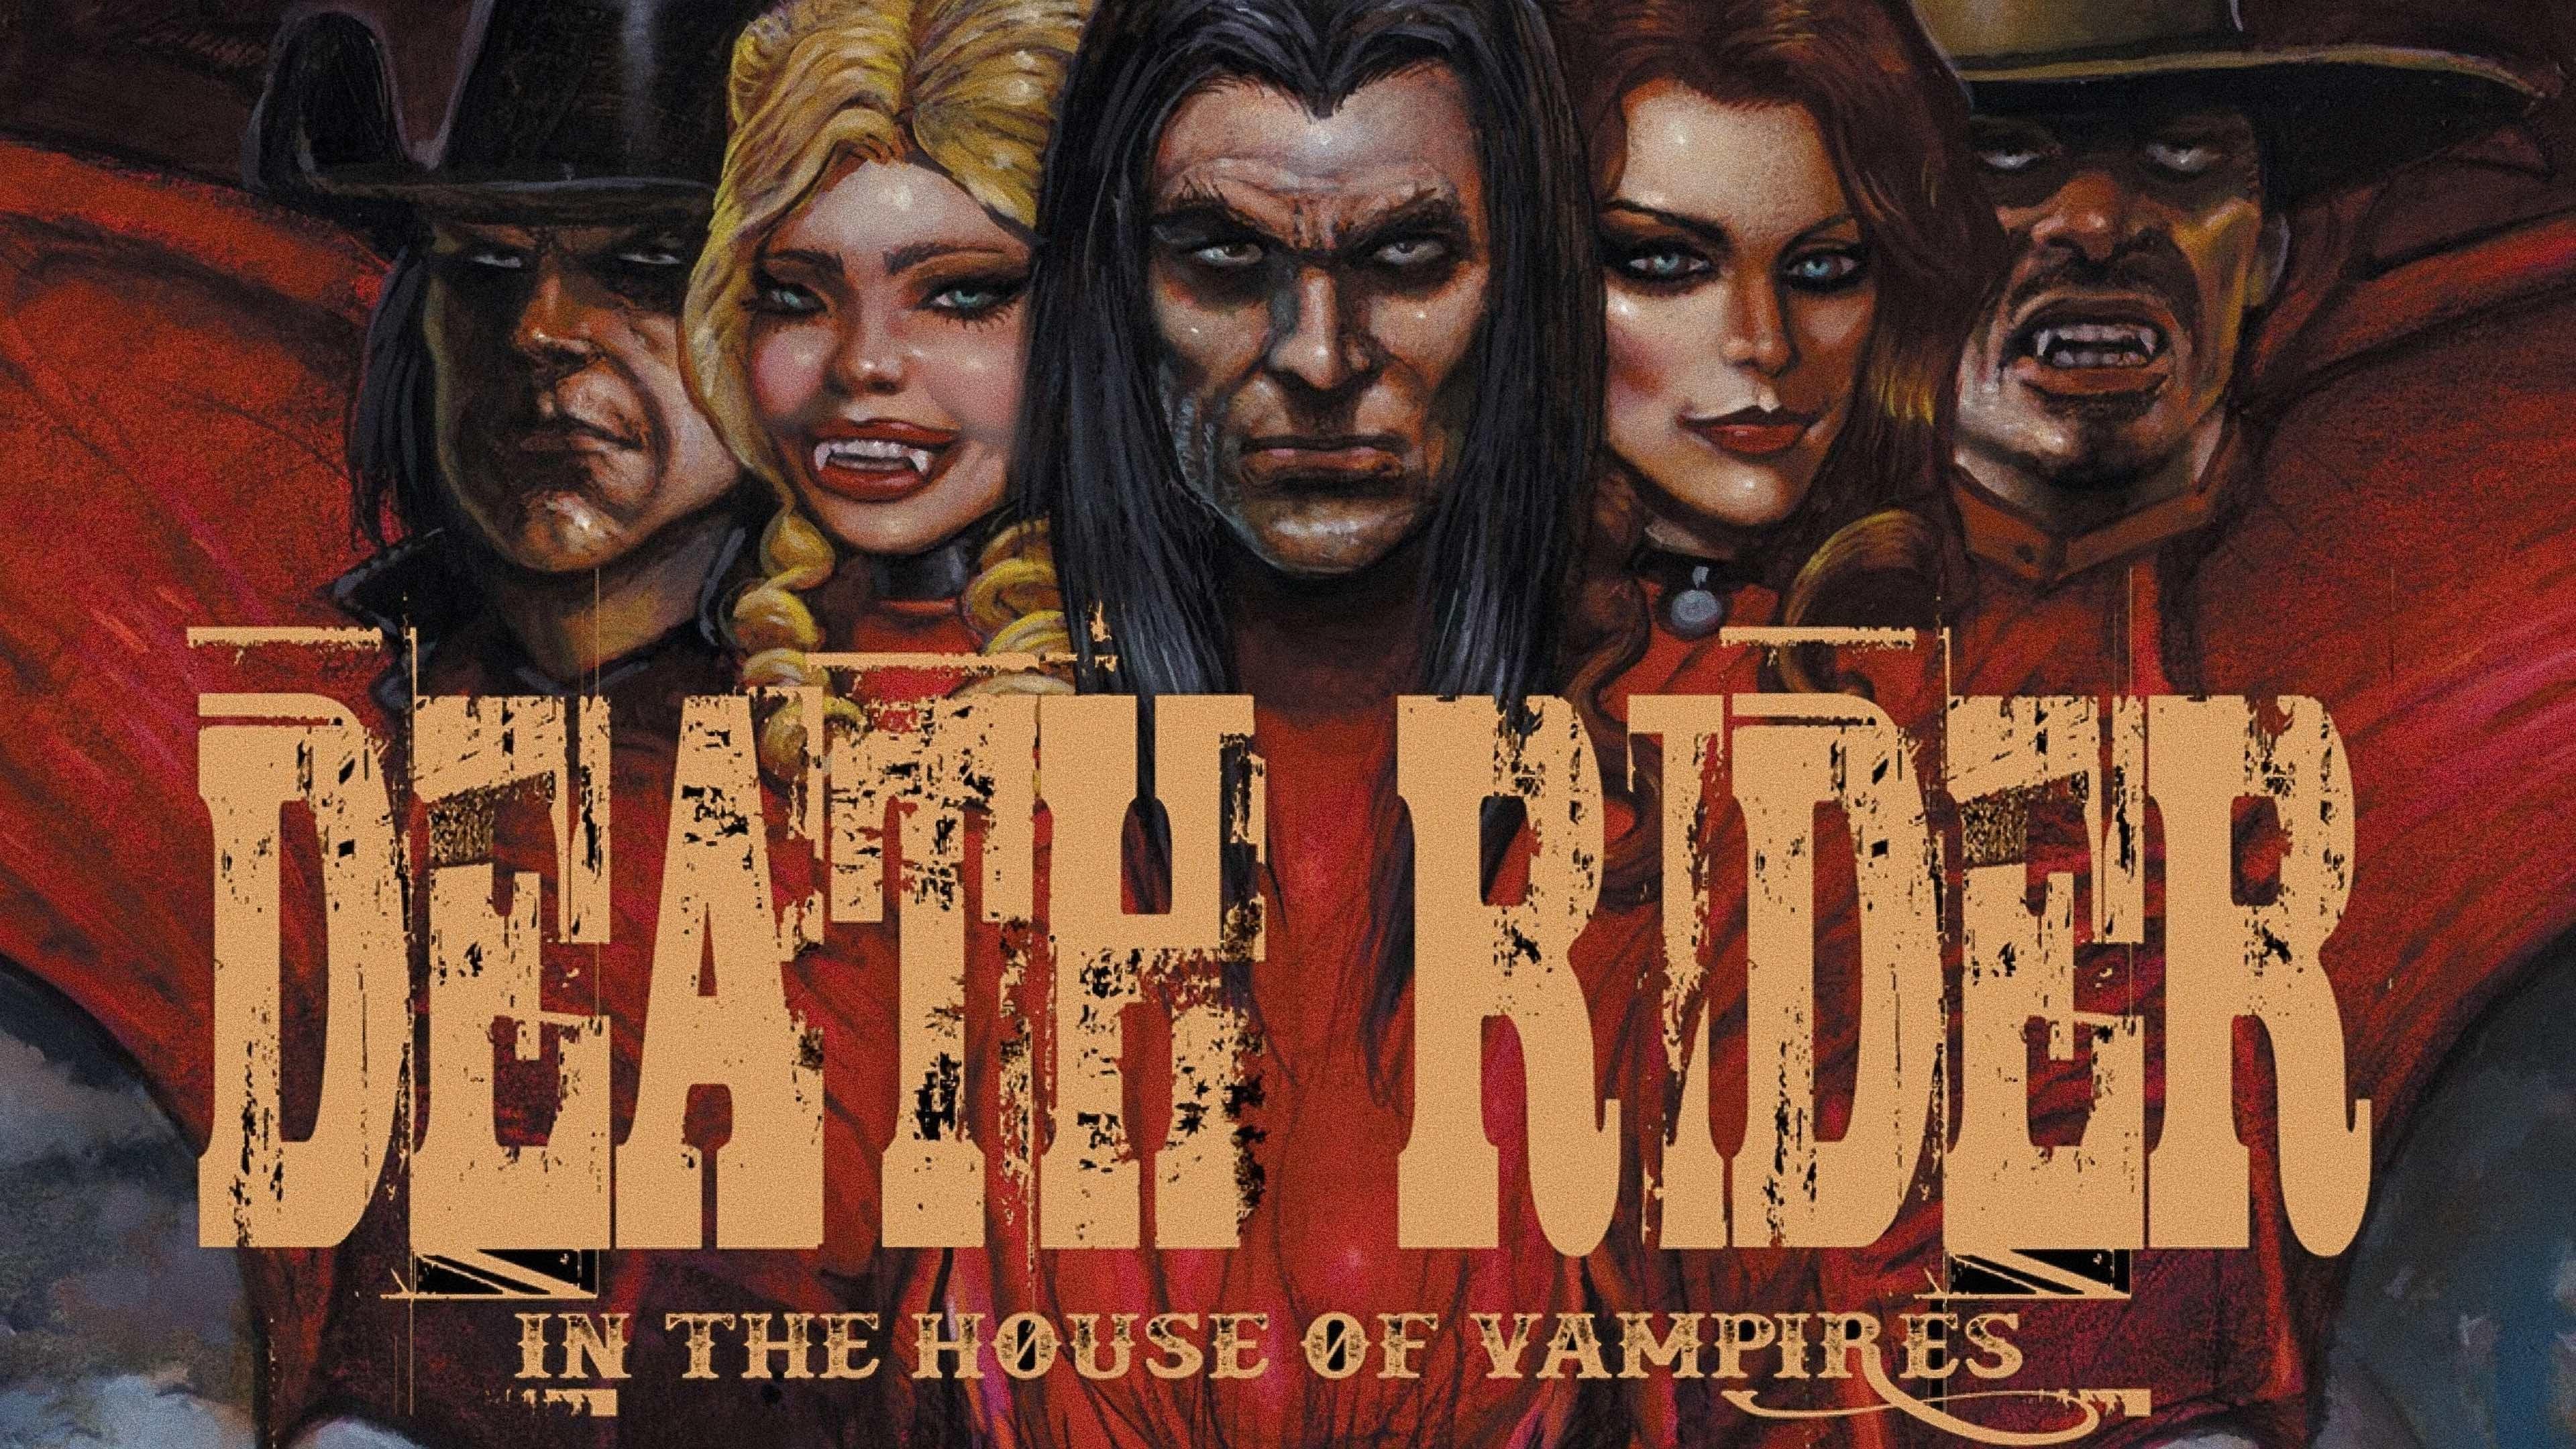 Death Rider in the House of Vampires backdrop